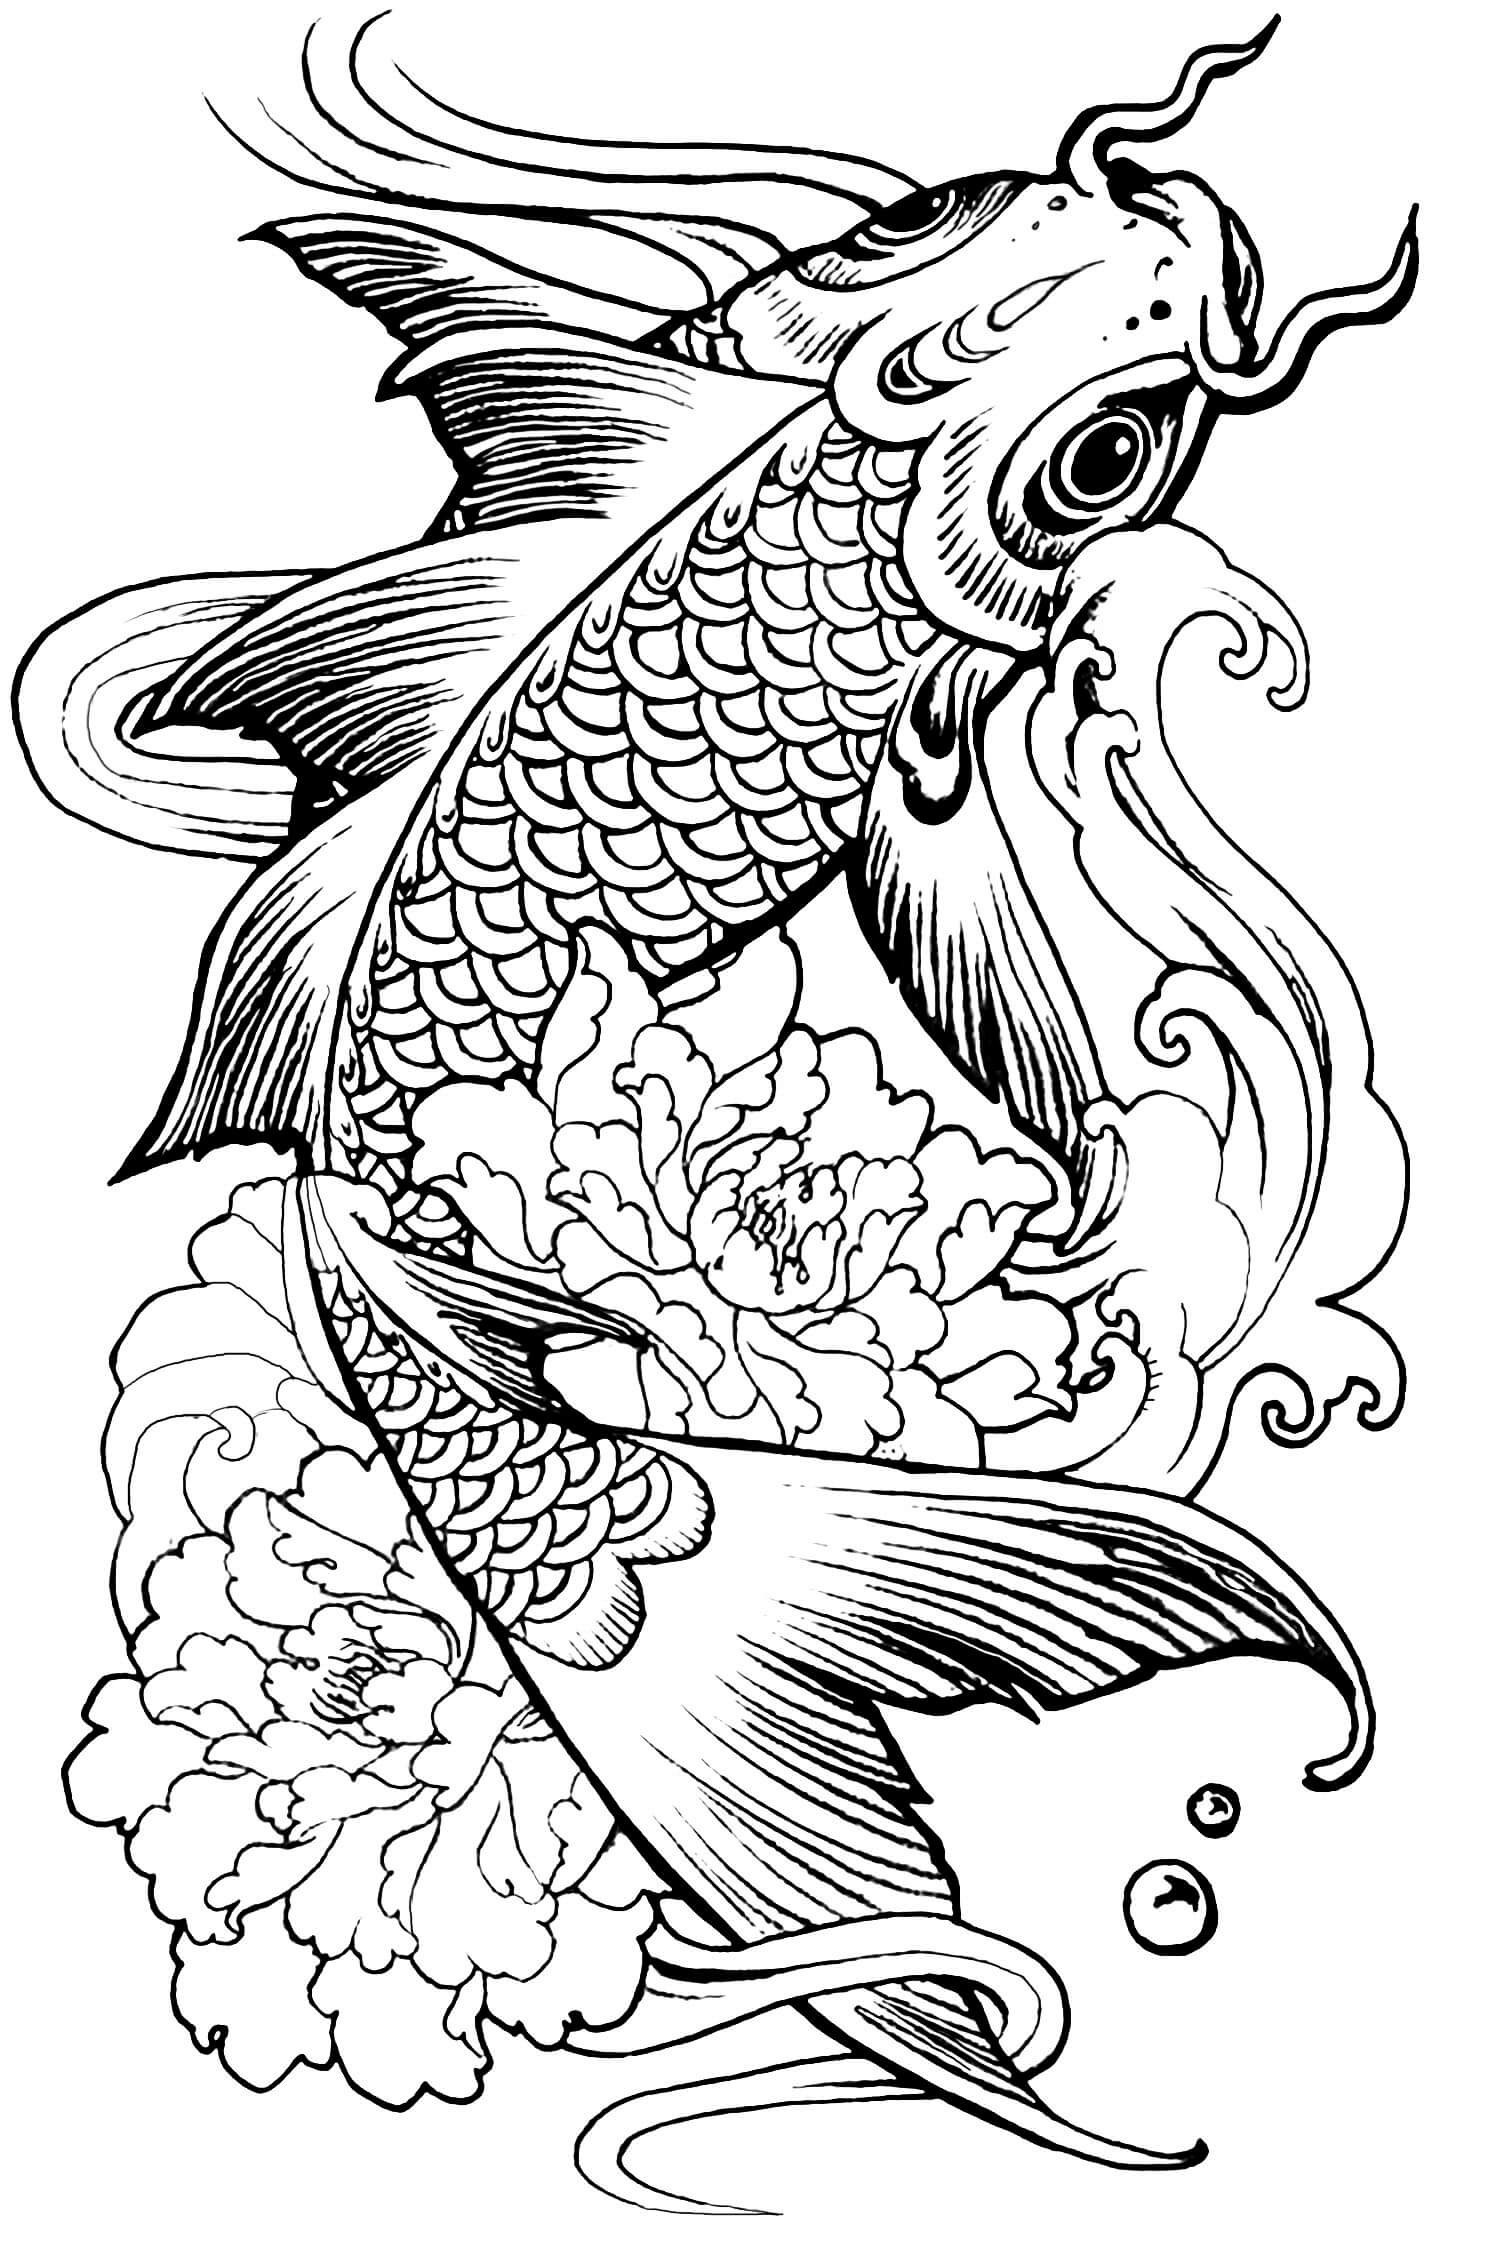 Adult Coloring Books For Men
 Animal Coloring Pages Best Coloring Pages For Kids